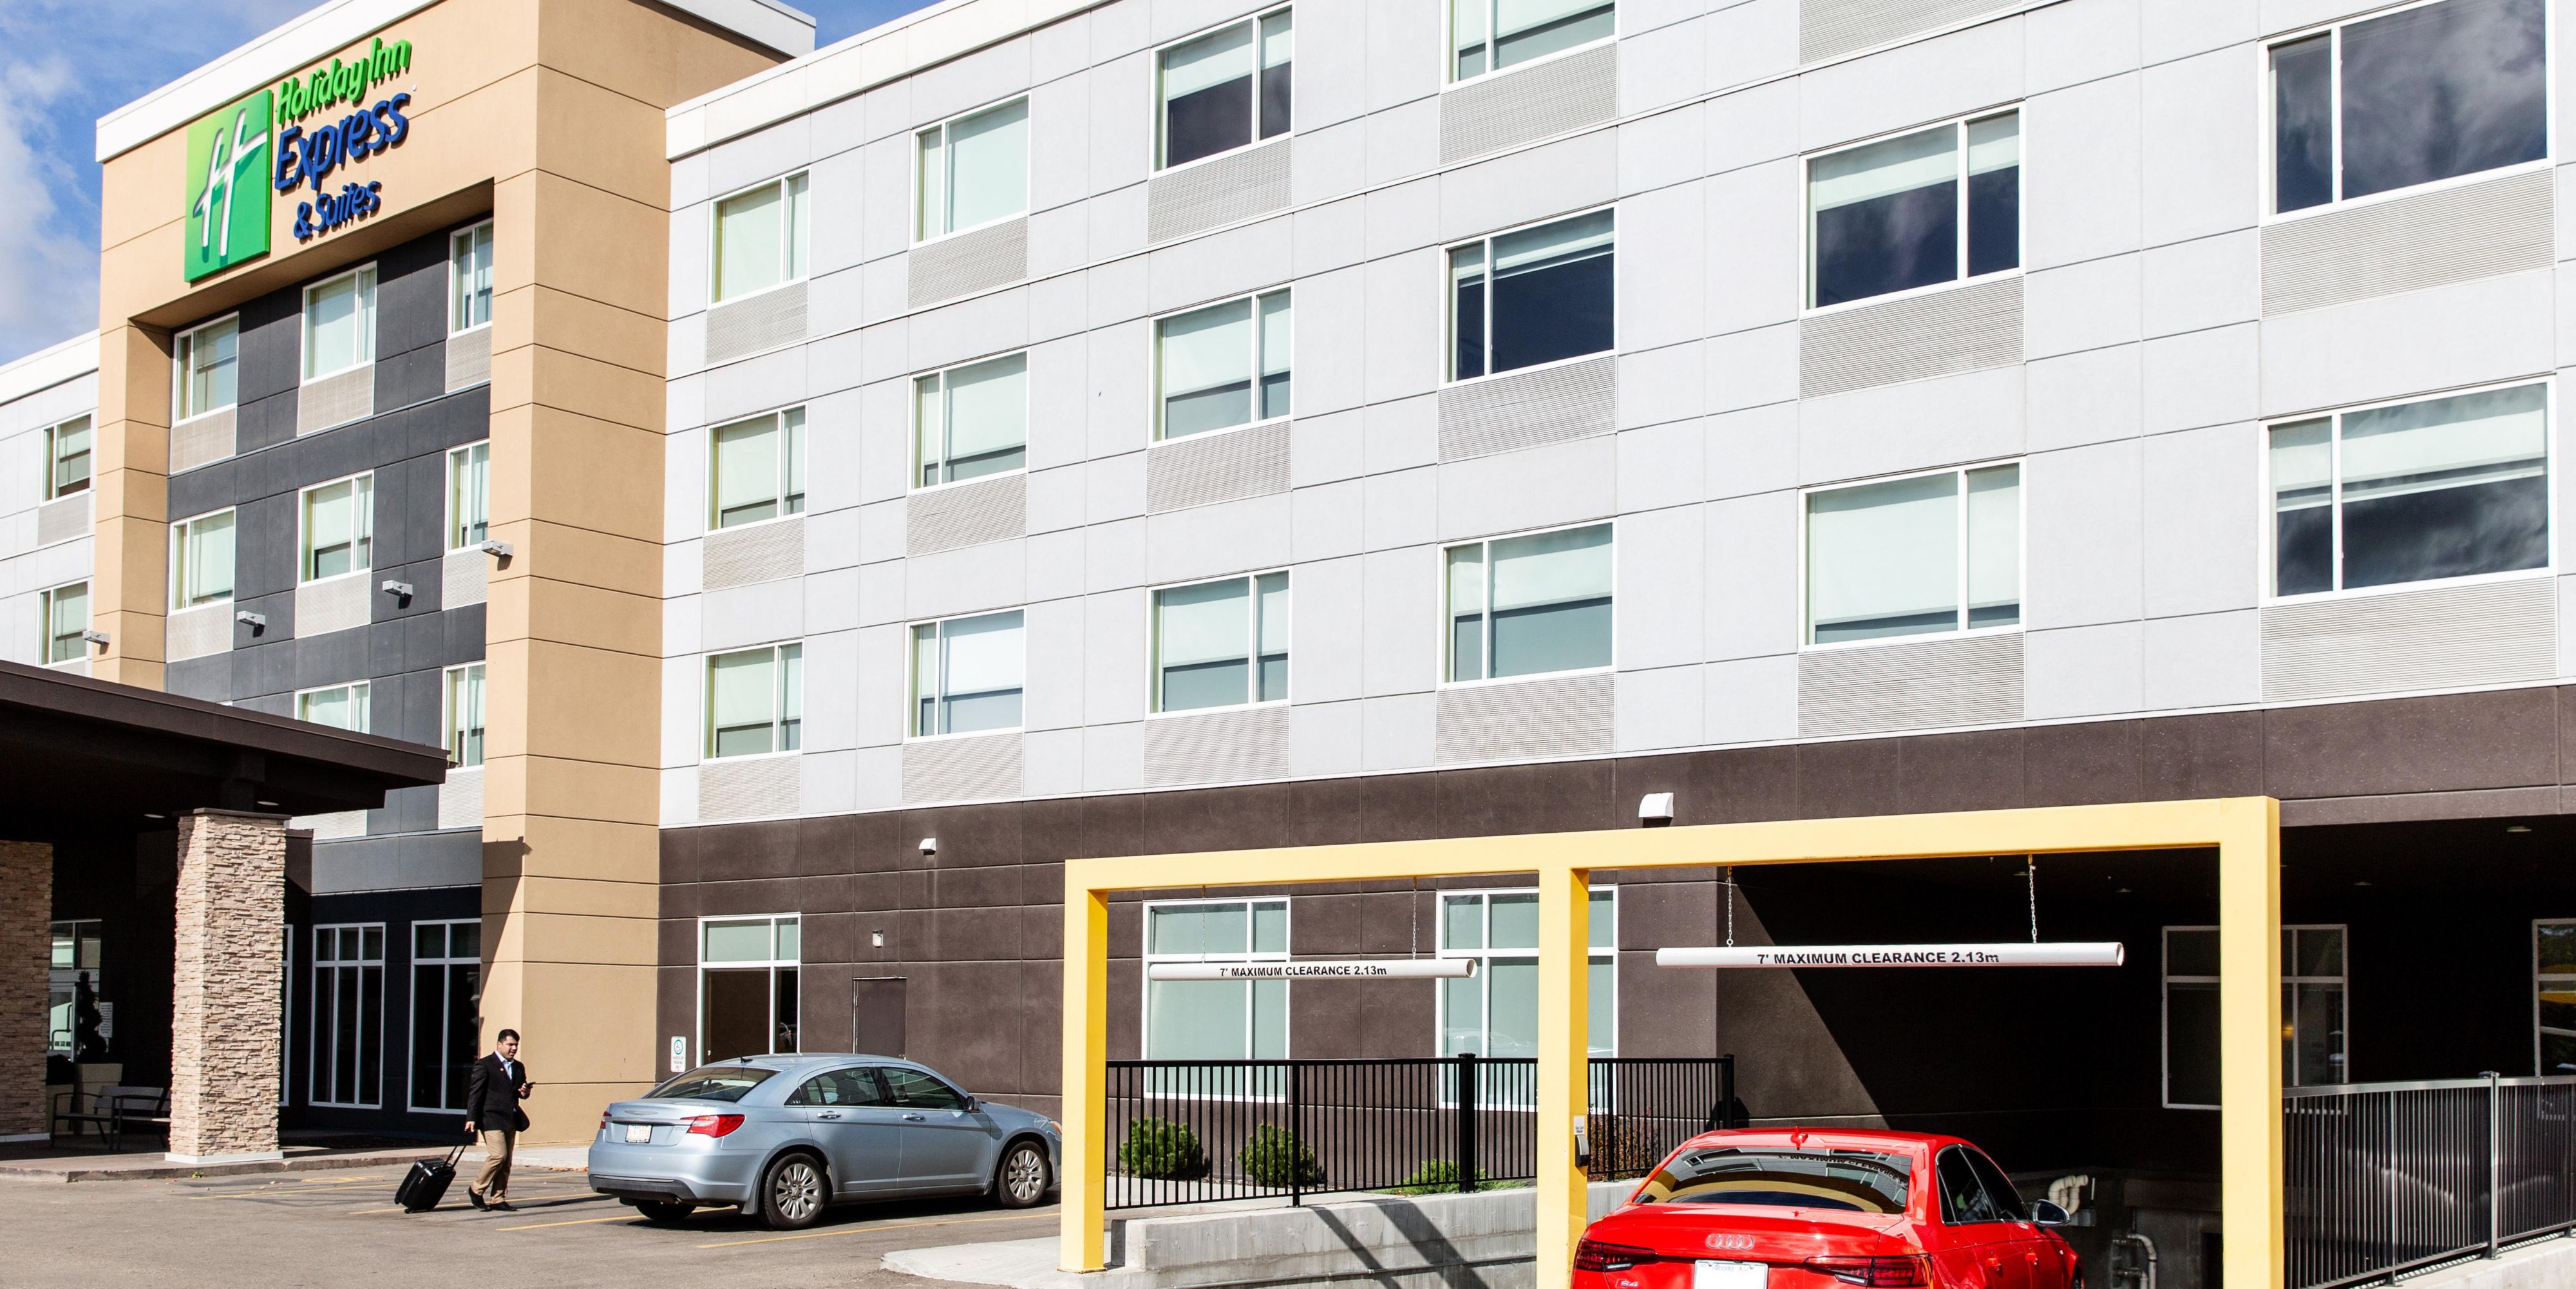 Our hotel features complimentary Secure Heated Underground parking. This perk allows guests to stay warm in the winter and cool in summer. Complimentary surface parking is also available! 